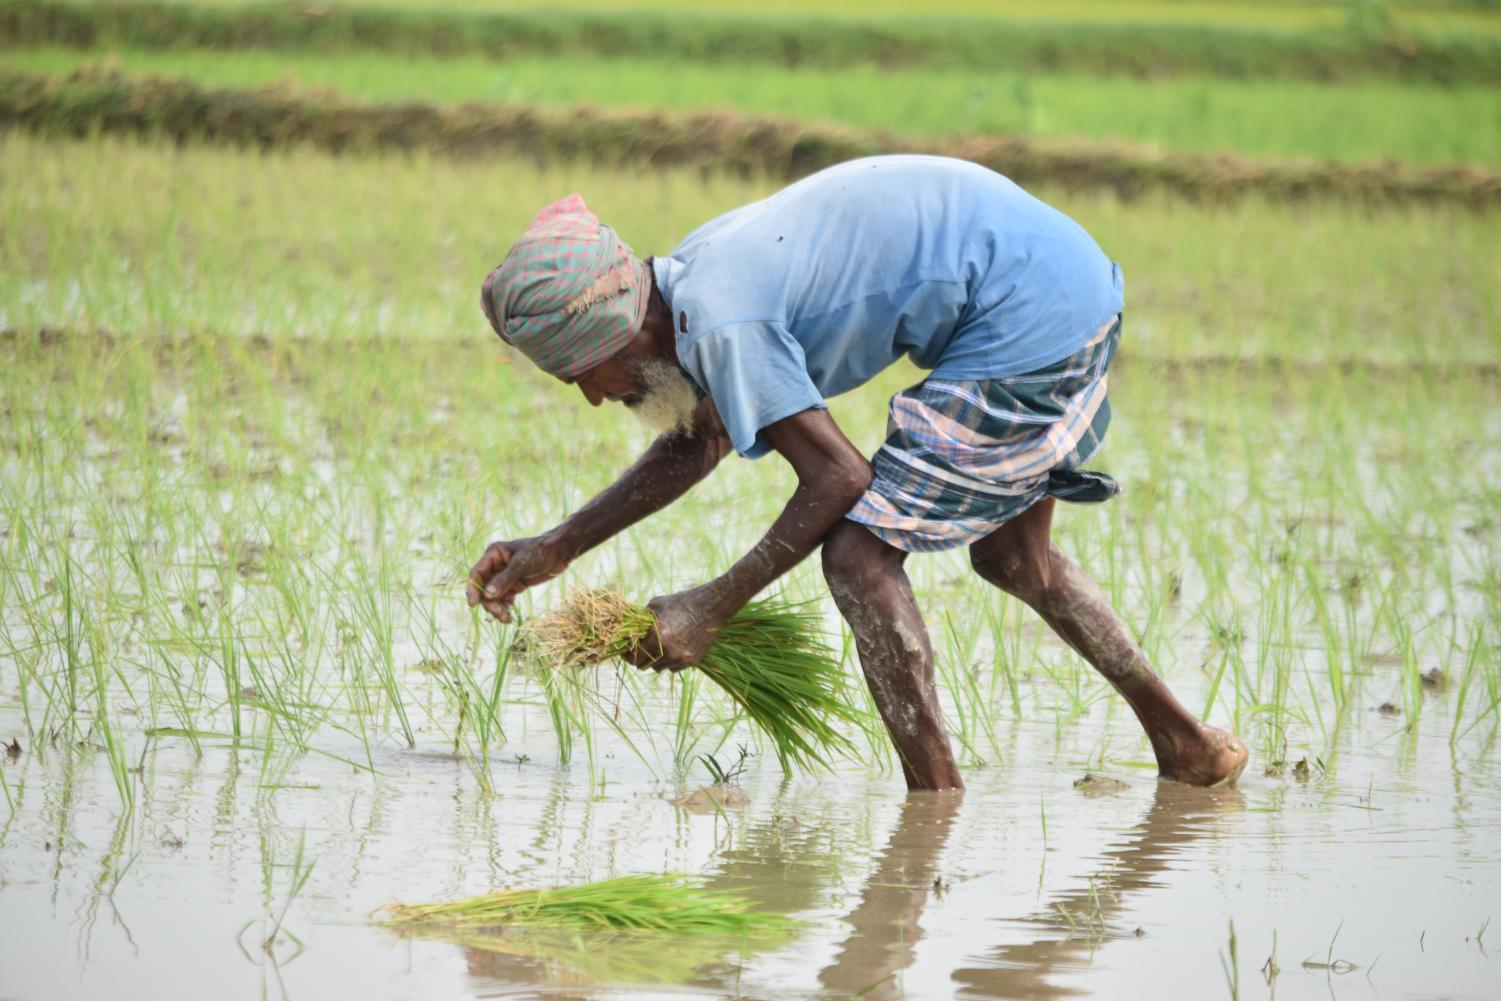 Most Bangladeshi farmers do not have modern equipment such as tractors and automatic seed planters, so they plant seeds and collect harvests one by one with their bare hands.